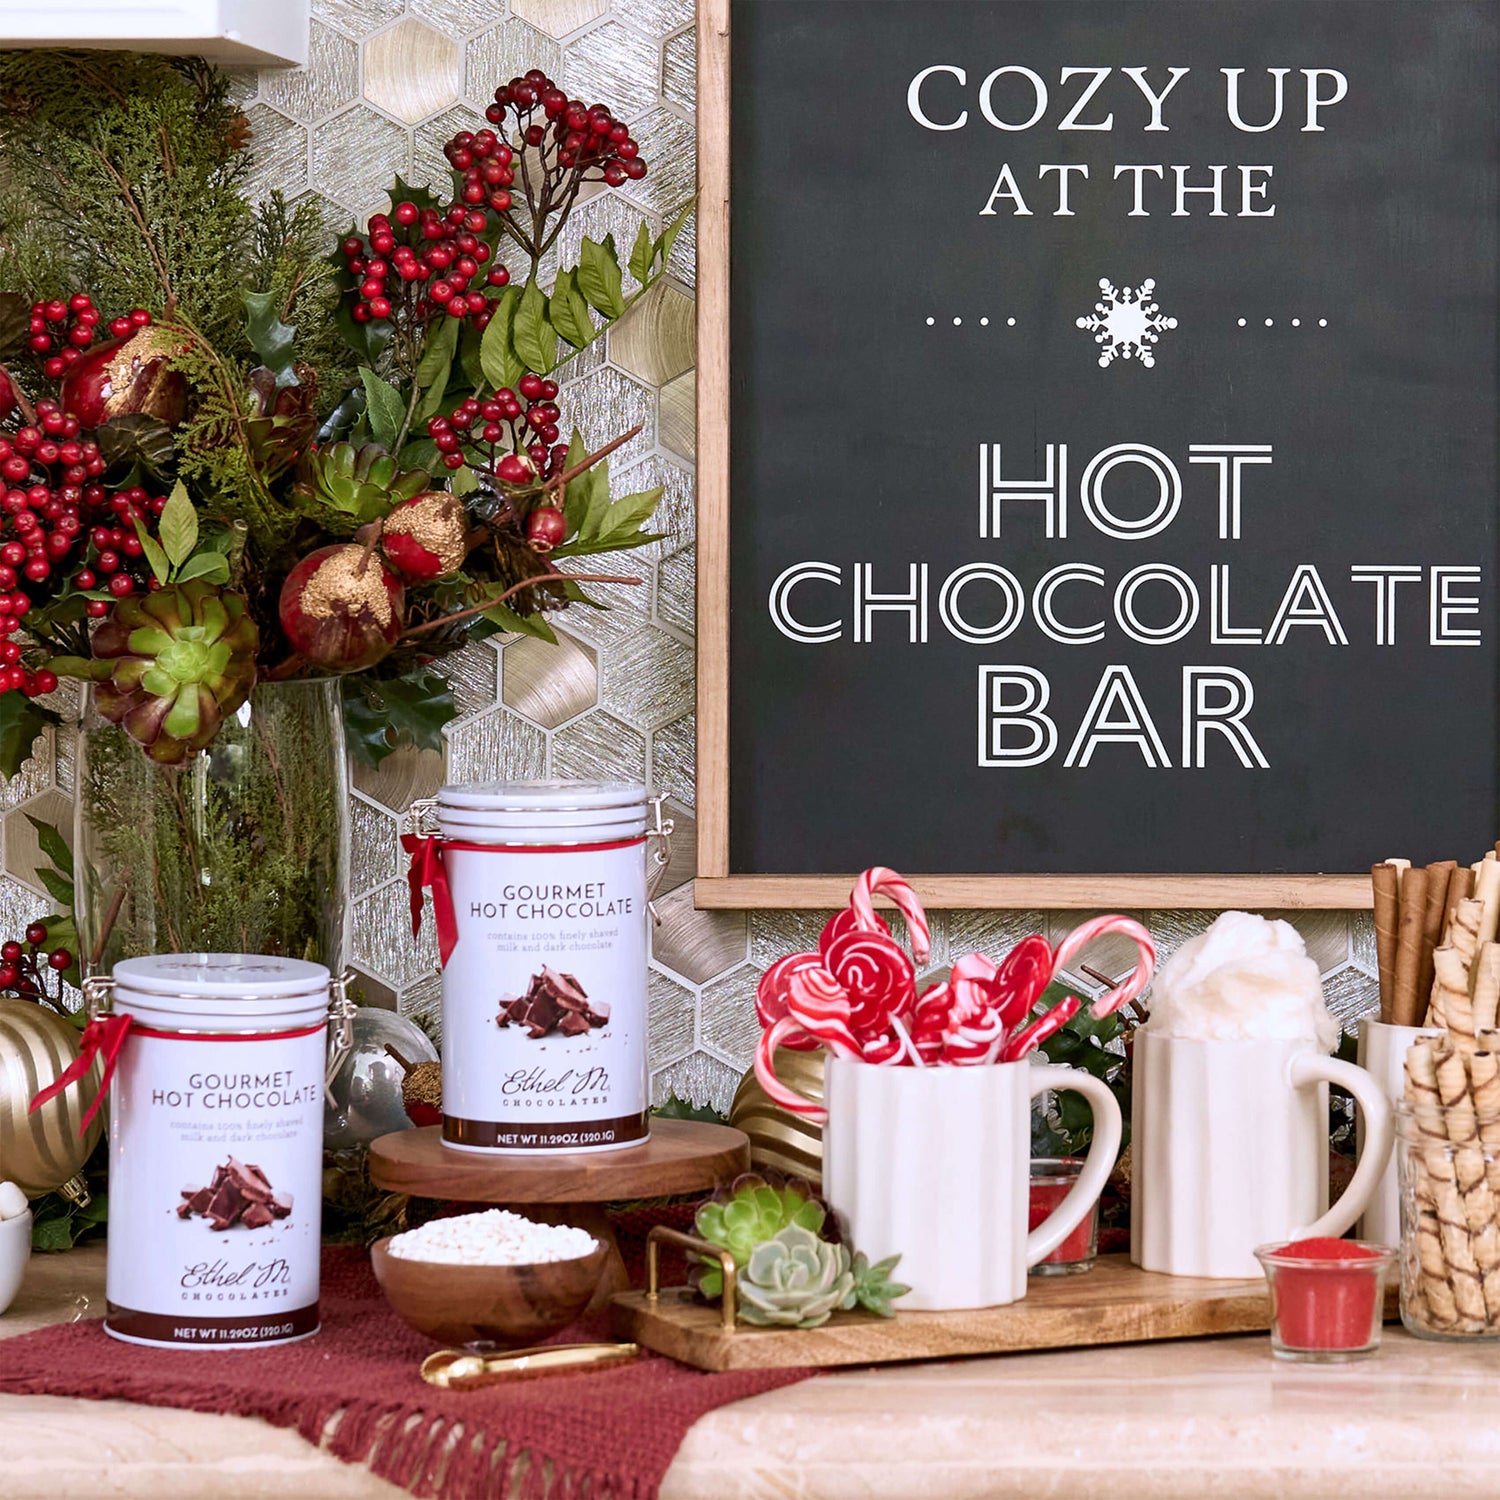 Ethel M Chocolates Gourmet Hot Chocolate Tin with Holiday Red Ribbon Lifestyle Image - Image shows two tins sitting on a bar with a mug of candy canes and a bowl of marshmallows with a sign in the background that says Cozy Up at the Hot Chocolate Bar